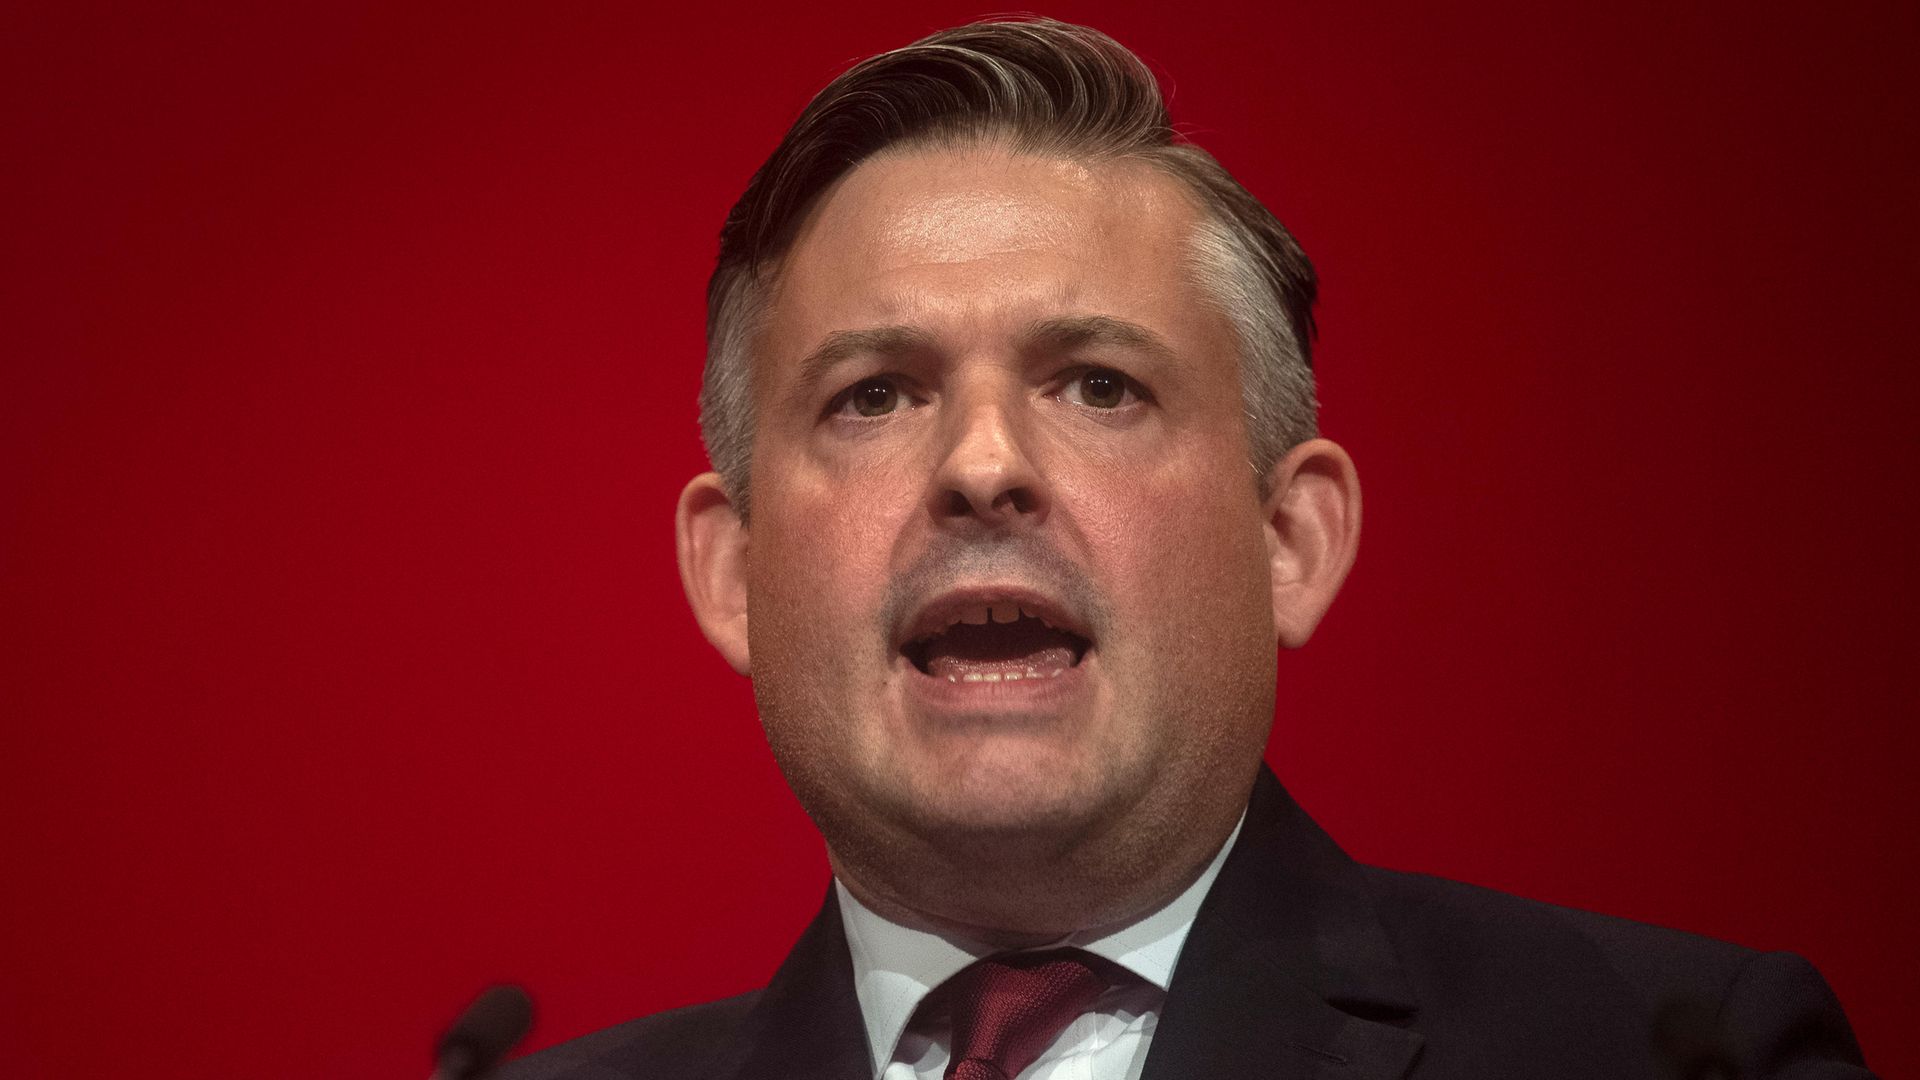 Jon Ashworth, Shadow secretary of state for health, delivers his speech at the Labour Party Conference. - Credit: PA